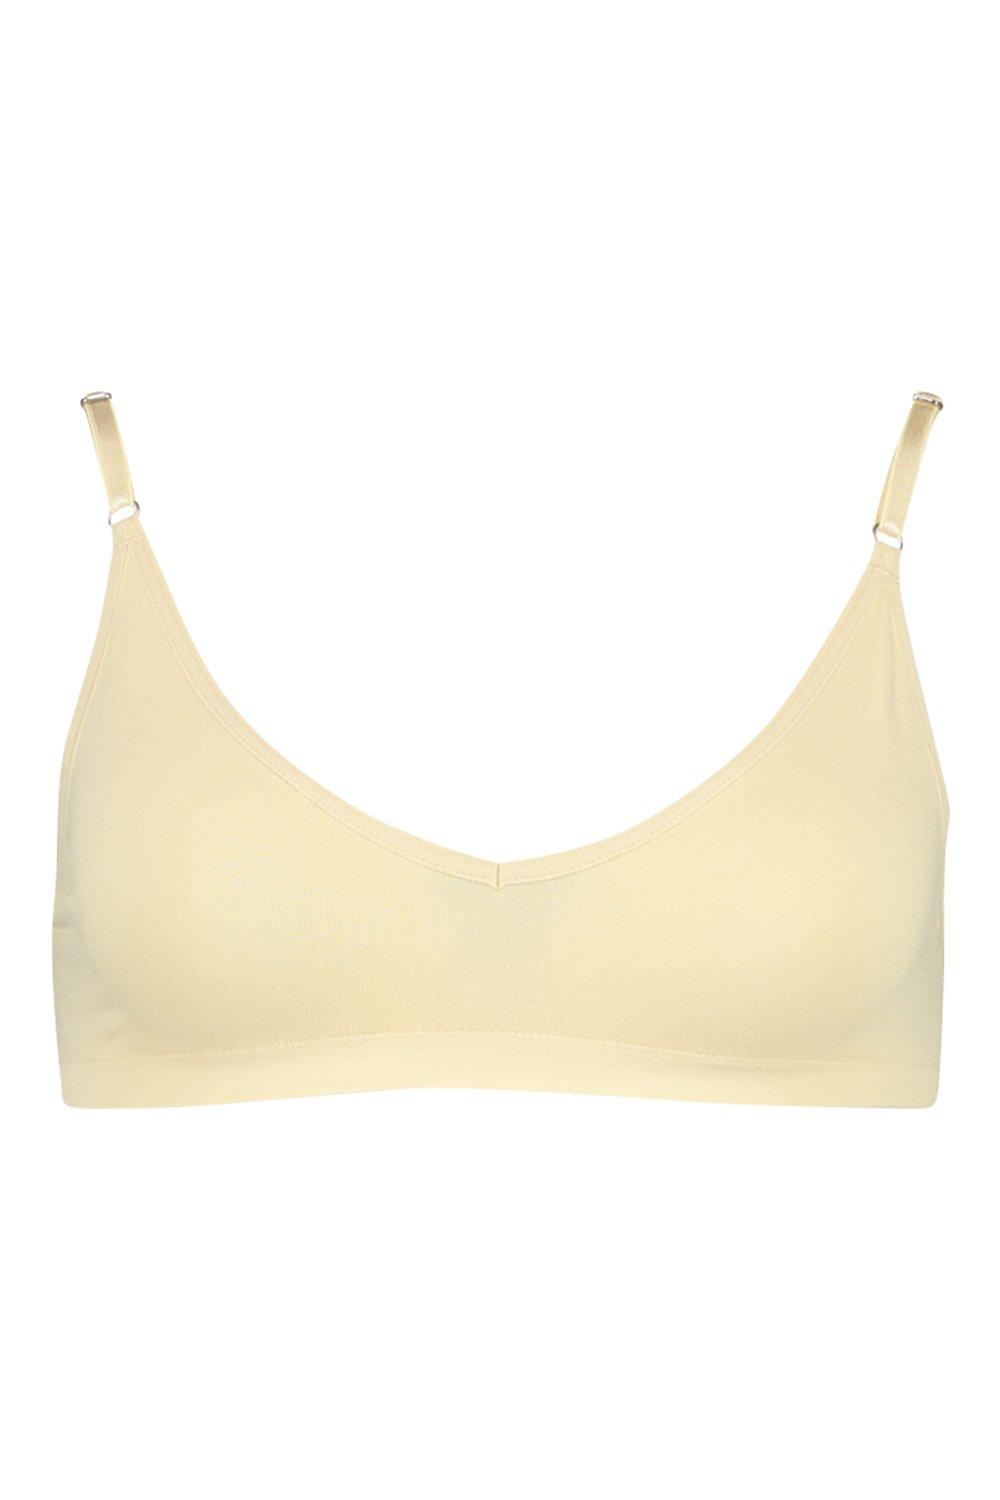 Know Your Lemons Seamless Triangle Bralette